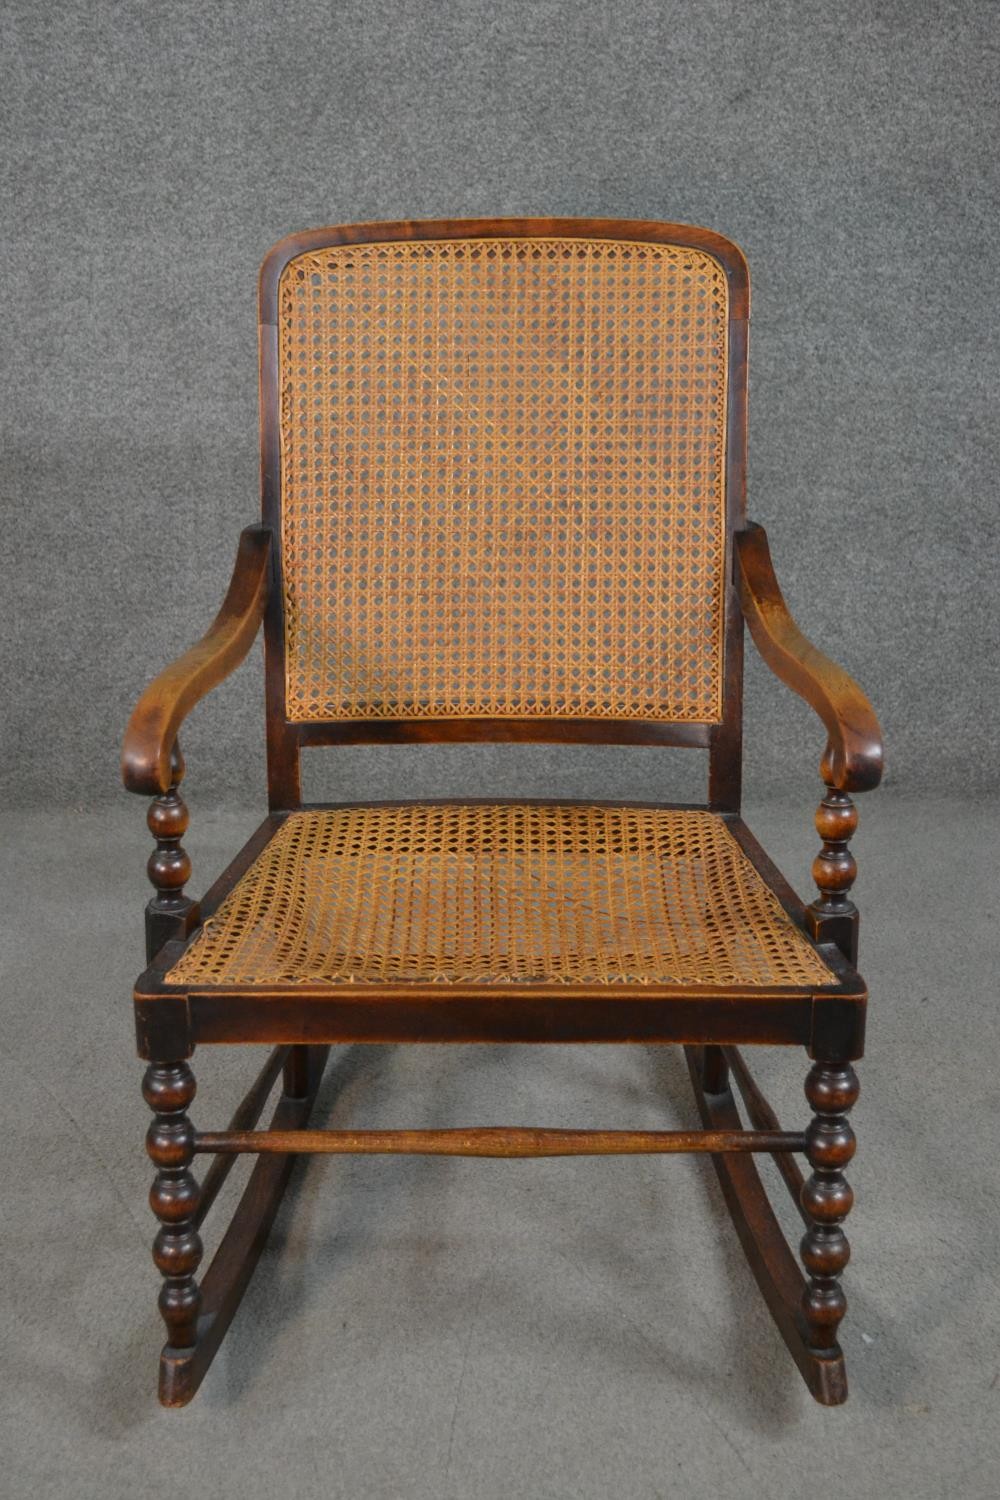 A circa 1900 stained beech rocking chair, with a caned back and seat, open arms, with bobbin